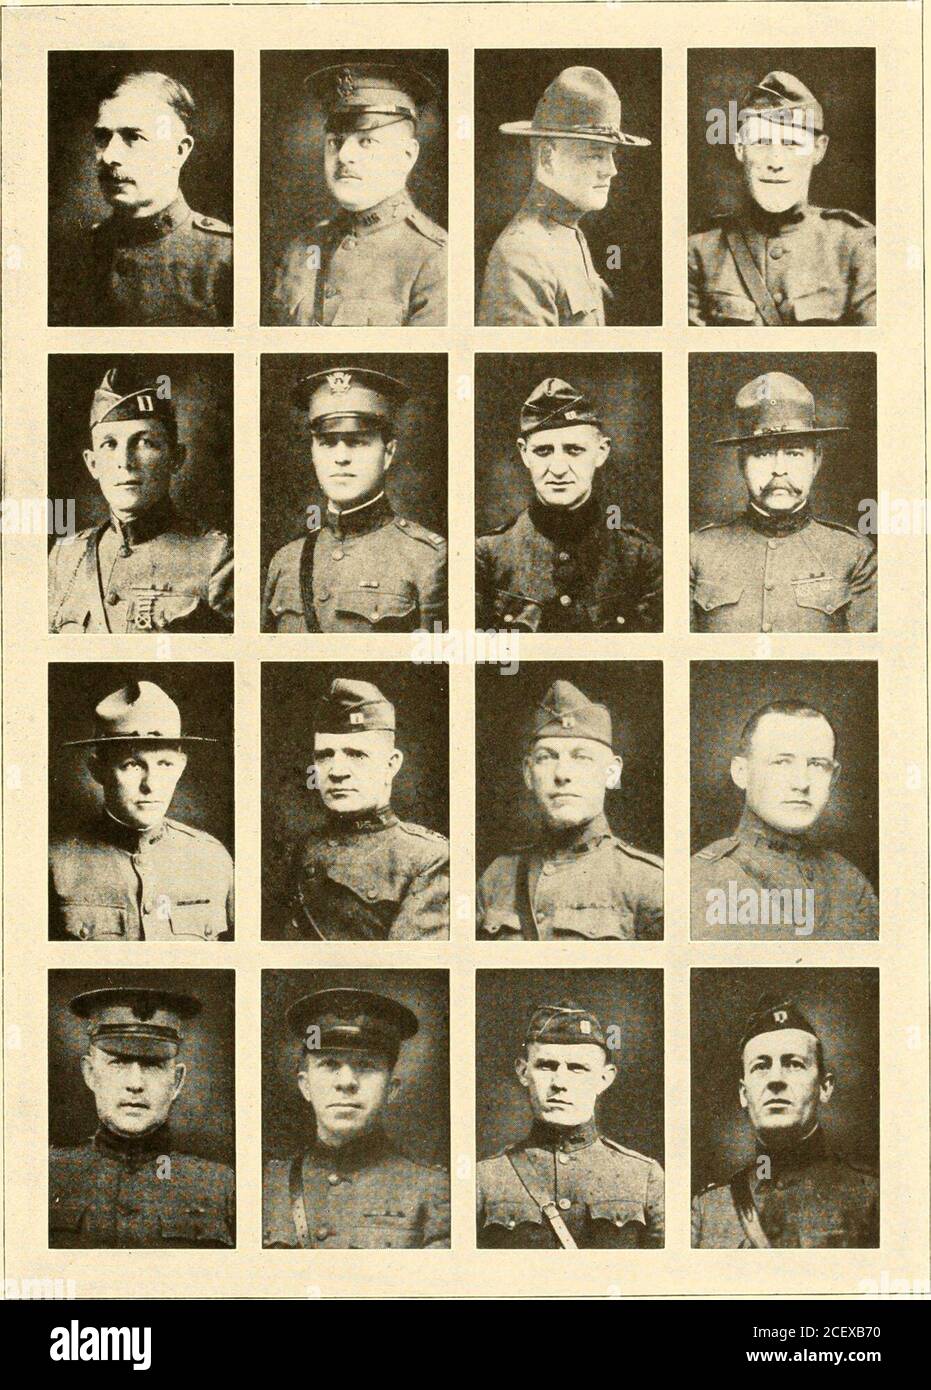 . Illinois in the World War; an illustrated record prepared with the coöperation and under the direction of the leaders in the state's military and civilian organizations. James M. Eddy Majors Francis M. Allen George C. Amerson, M. C. Edward Bittel Harry E. Cheney Paul C. Gale Frederick E. Haines Walter H. Magner William R. Mangum, M. C. John M. Richmond Captains Walter C. Bisson, M. C. Melvin W. Bridges Edgar J. Emerich Raymond F. Fiedler Carroll M. Gale Henry A. Gano Nathan J. Harkness William Y. Hendron (later Major) Michael N. Hickey Walter H. Holden, D. C. Edwin S. Hopps David H. James, M Stock Photo